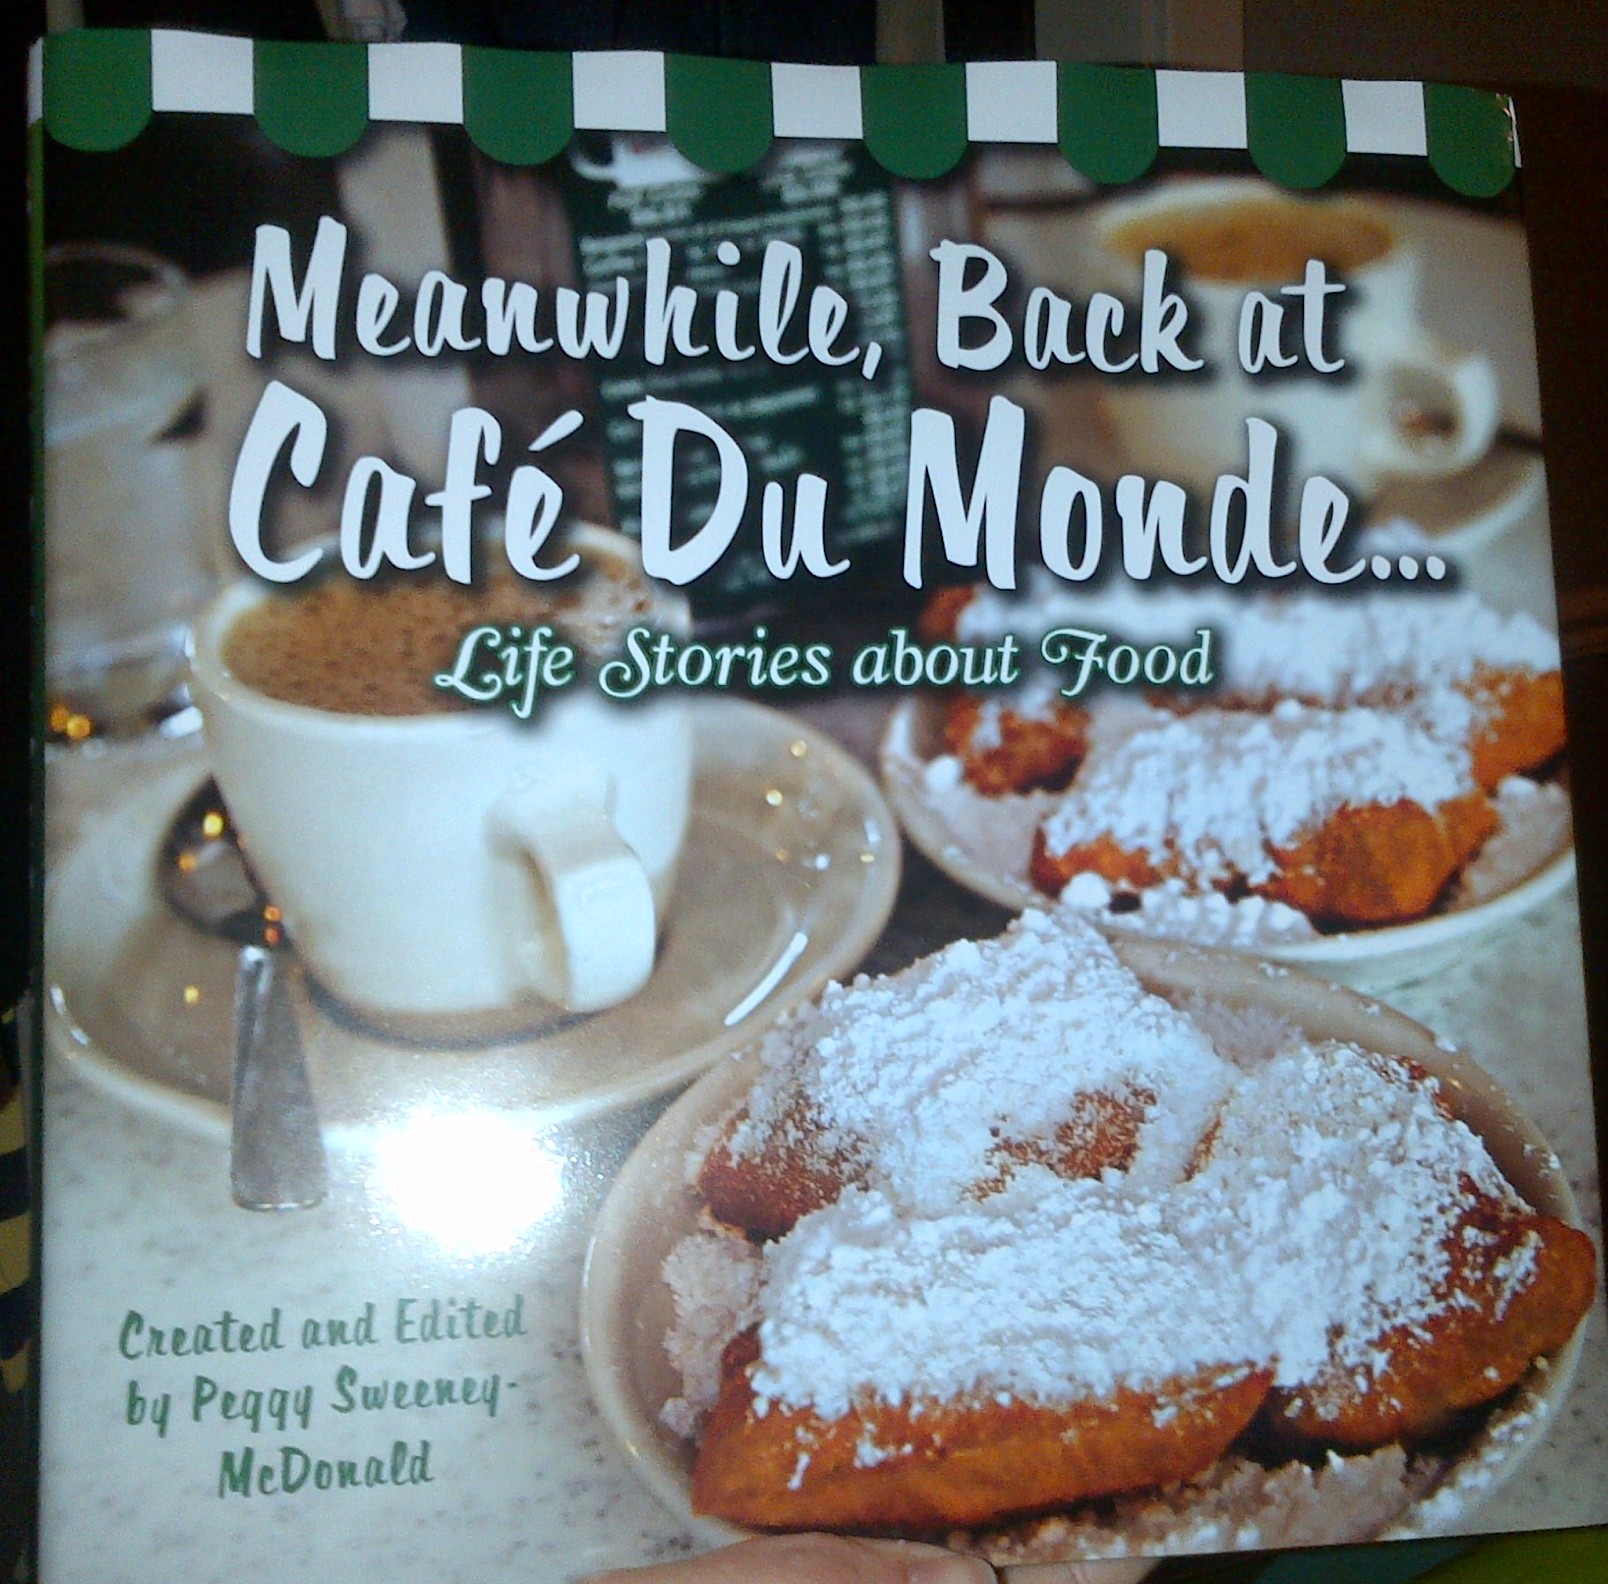 A meal, a memory, a story – Meanwhile, Back at Cafe’ Du Monde by Peggy Sweeney-McDonald